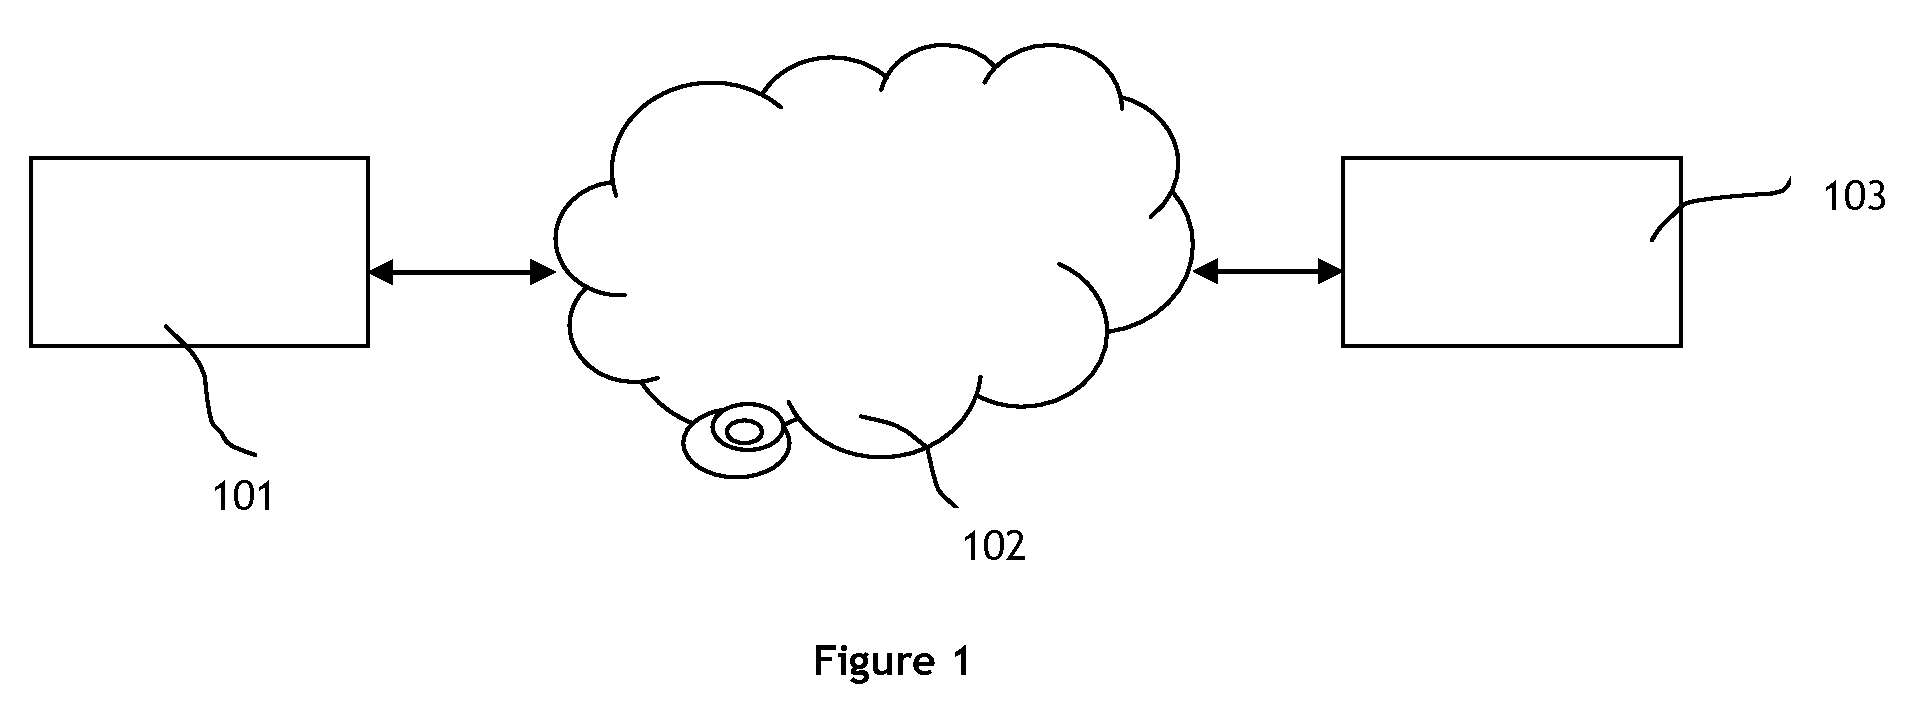 Systems and Methods for Improving Image Responsivity in a Multimedia Transmission System